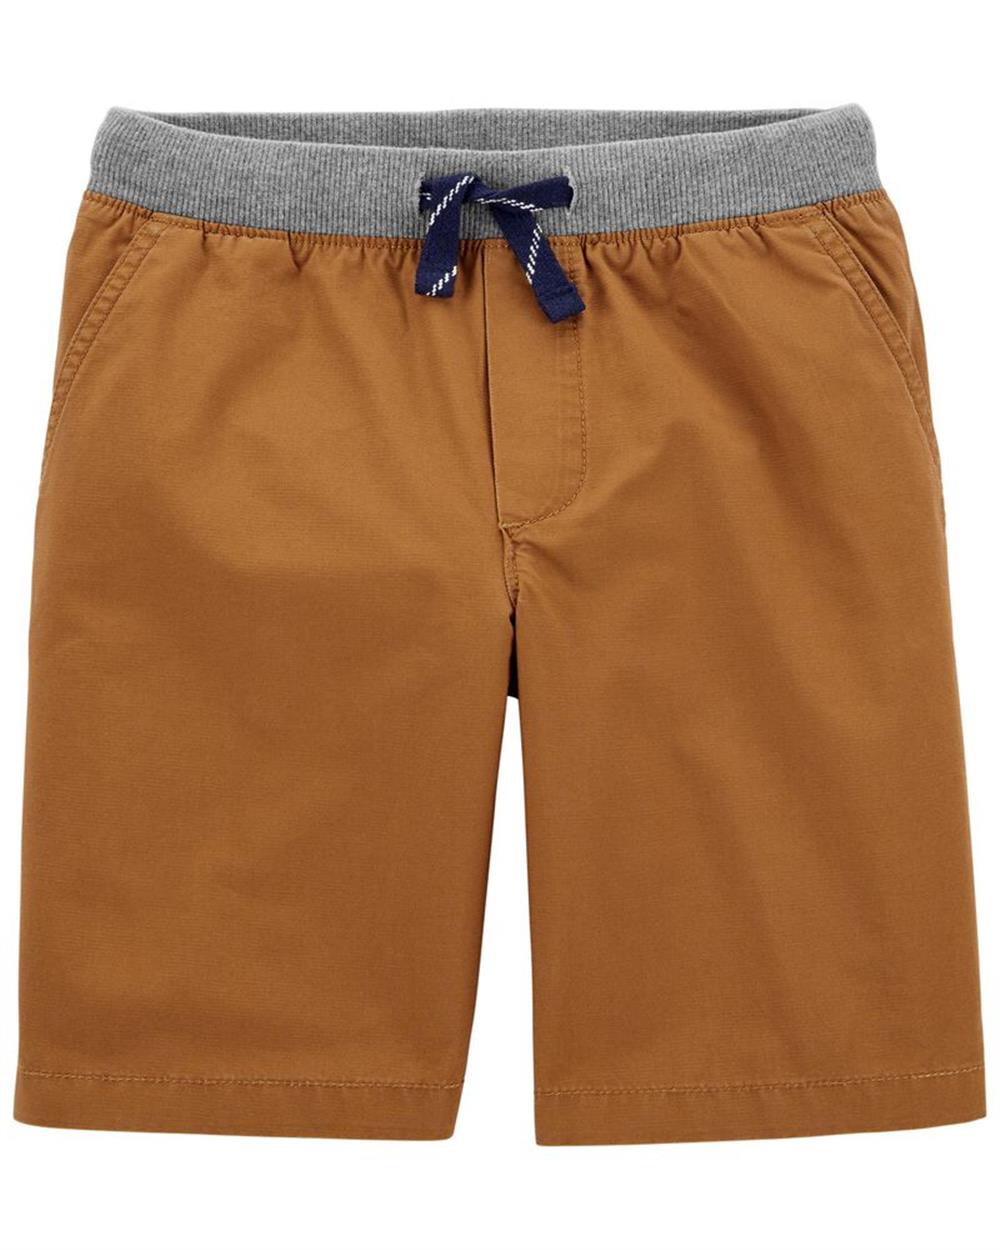 Carters Easy Pull-On Dock Shorts